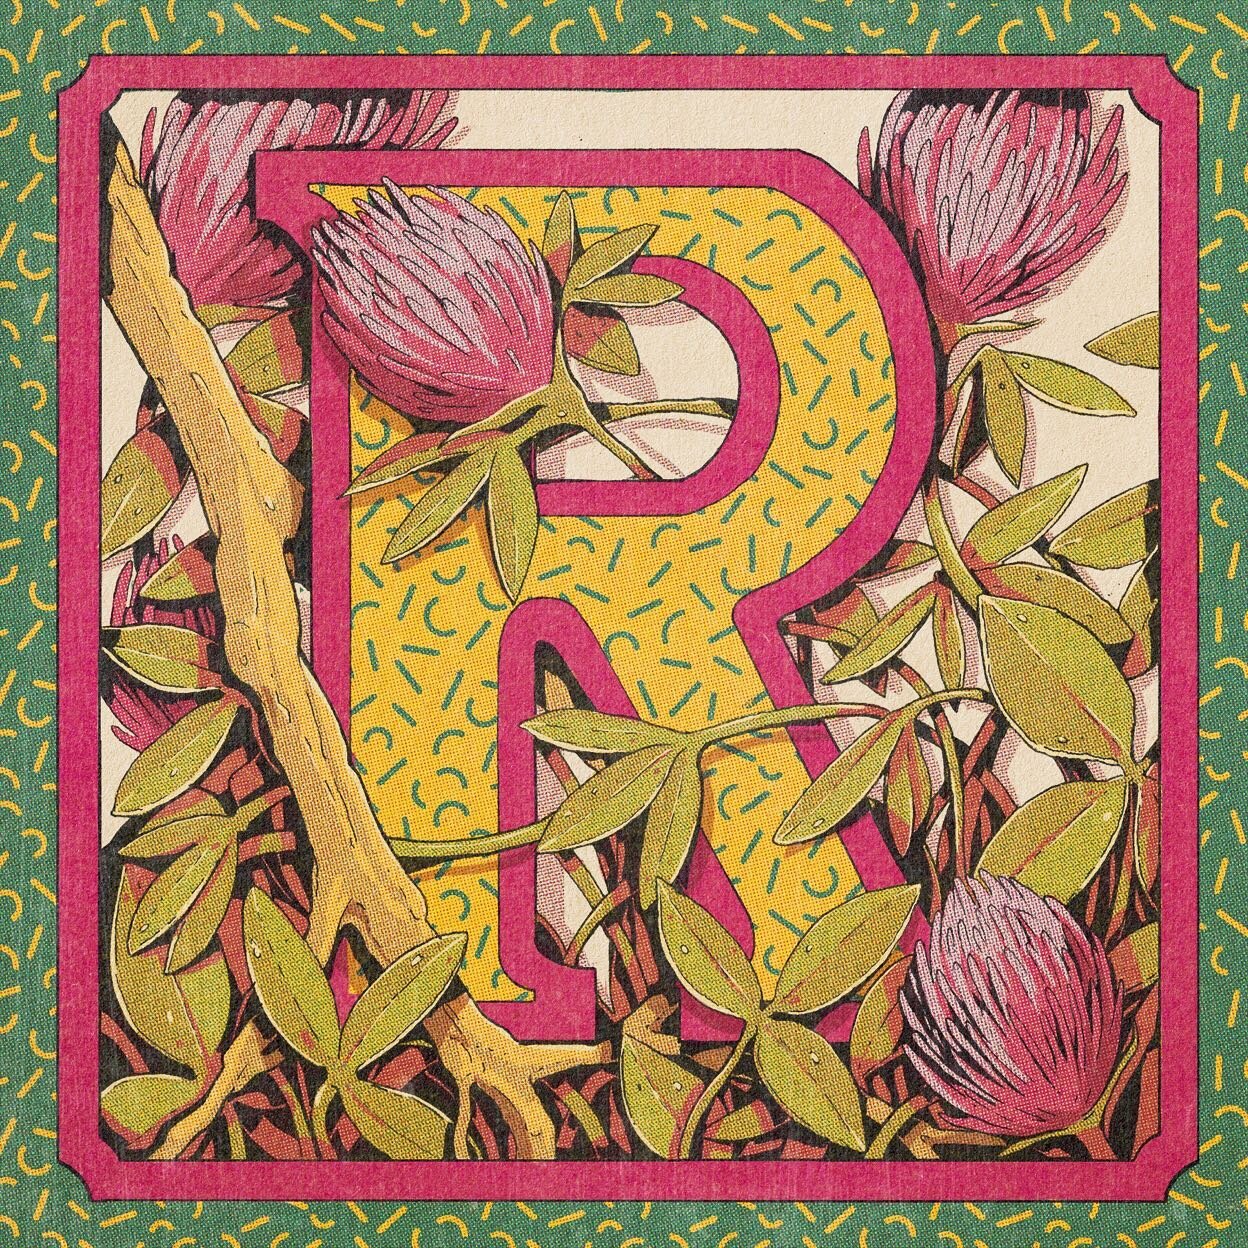 🍁🍁🍁The ABC&rsquo;s of Botany 🍁🍁🍁
.
R is for Red Clover ☘️
.
✨Red clover is a common weed that has a hidden medicinal potential! Mostly consumed in a tea or tincture, red clover is said to help with menopause, arthritis, whooping cough and possi